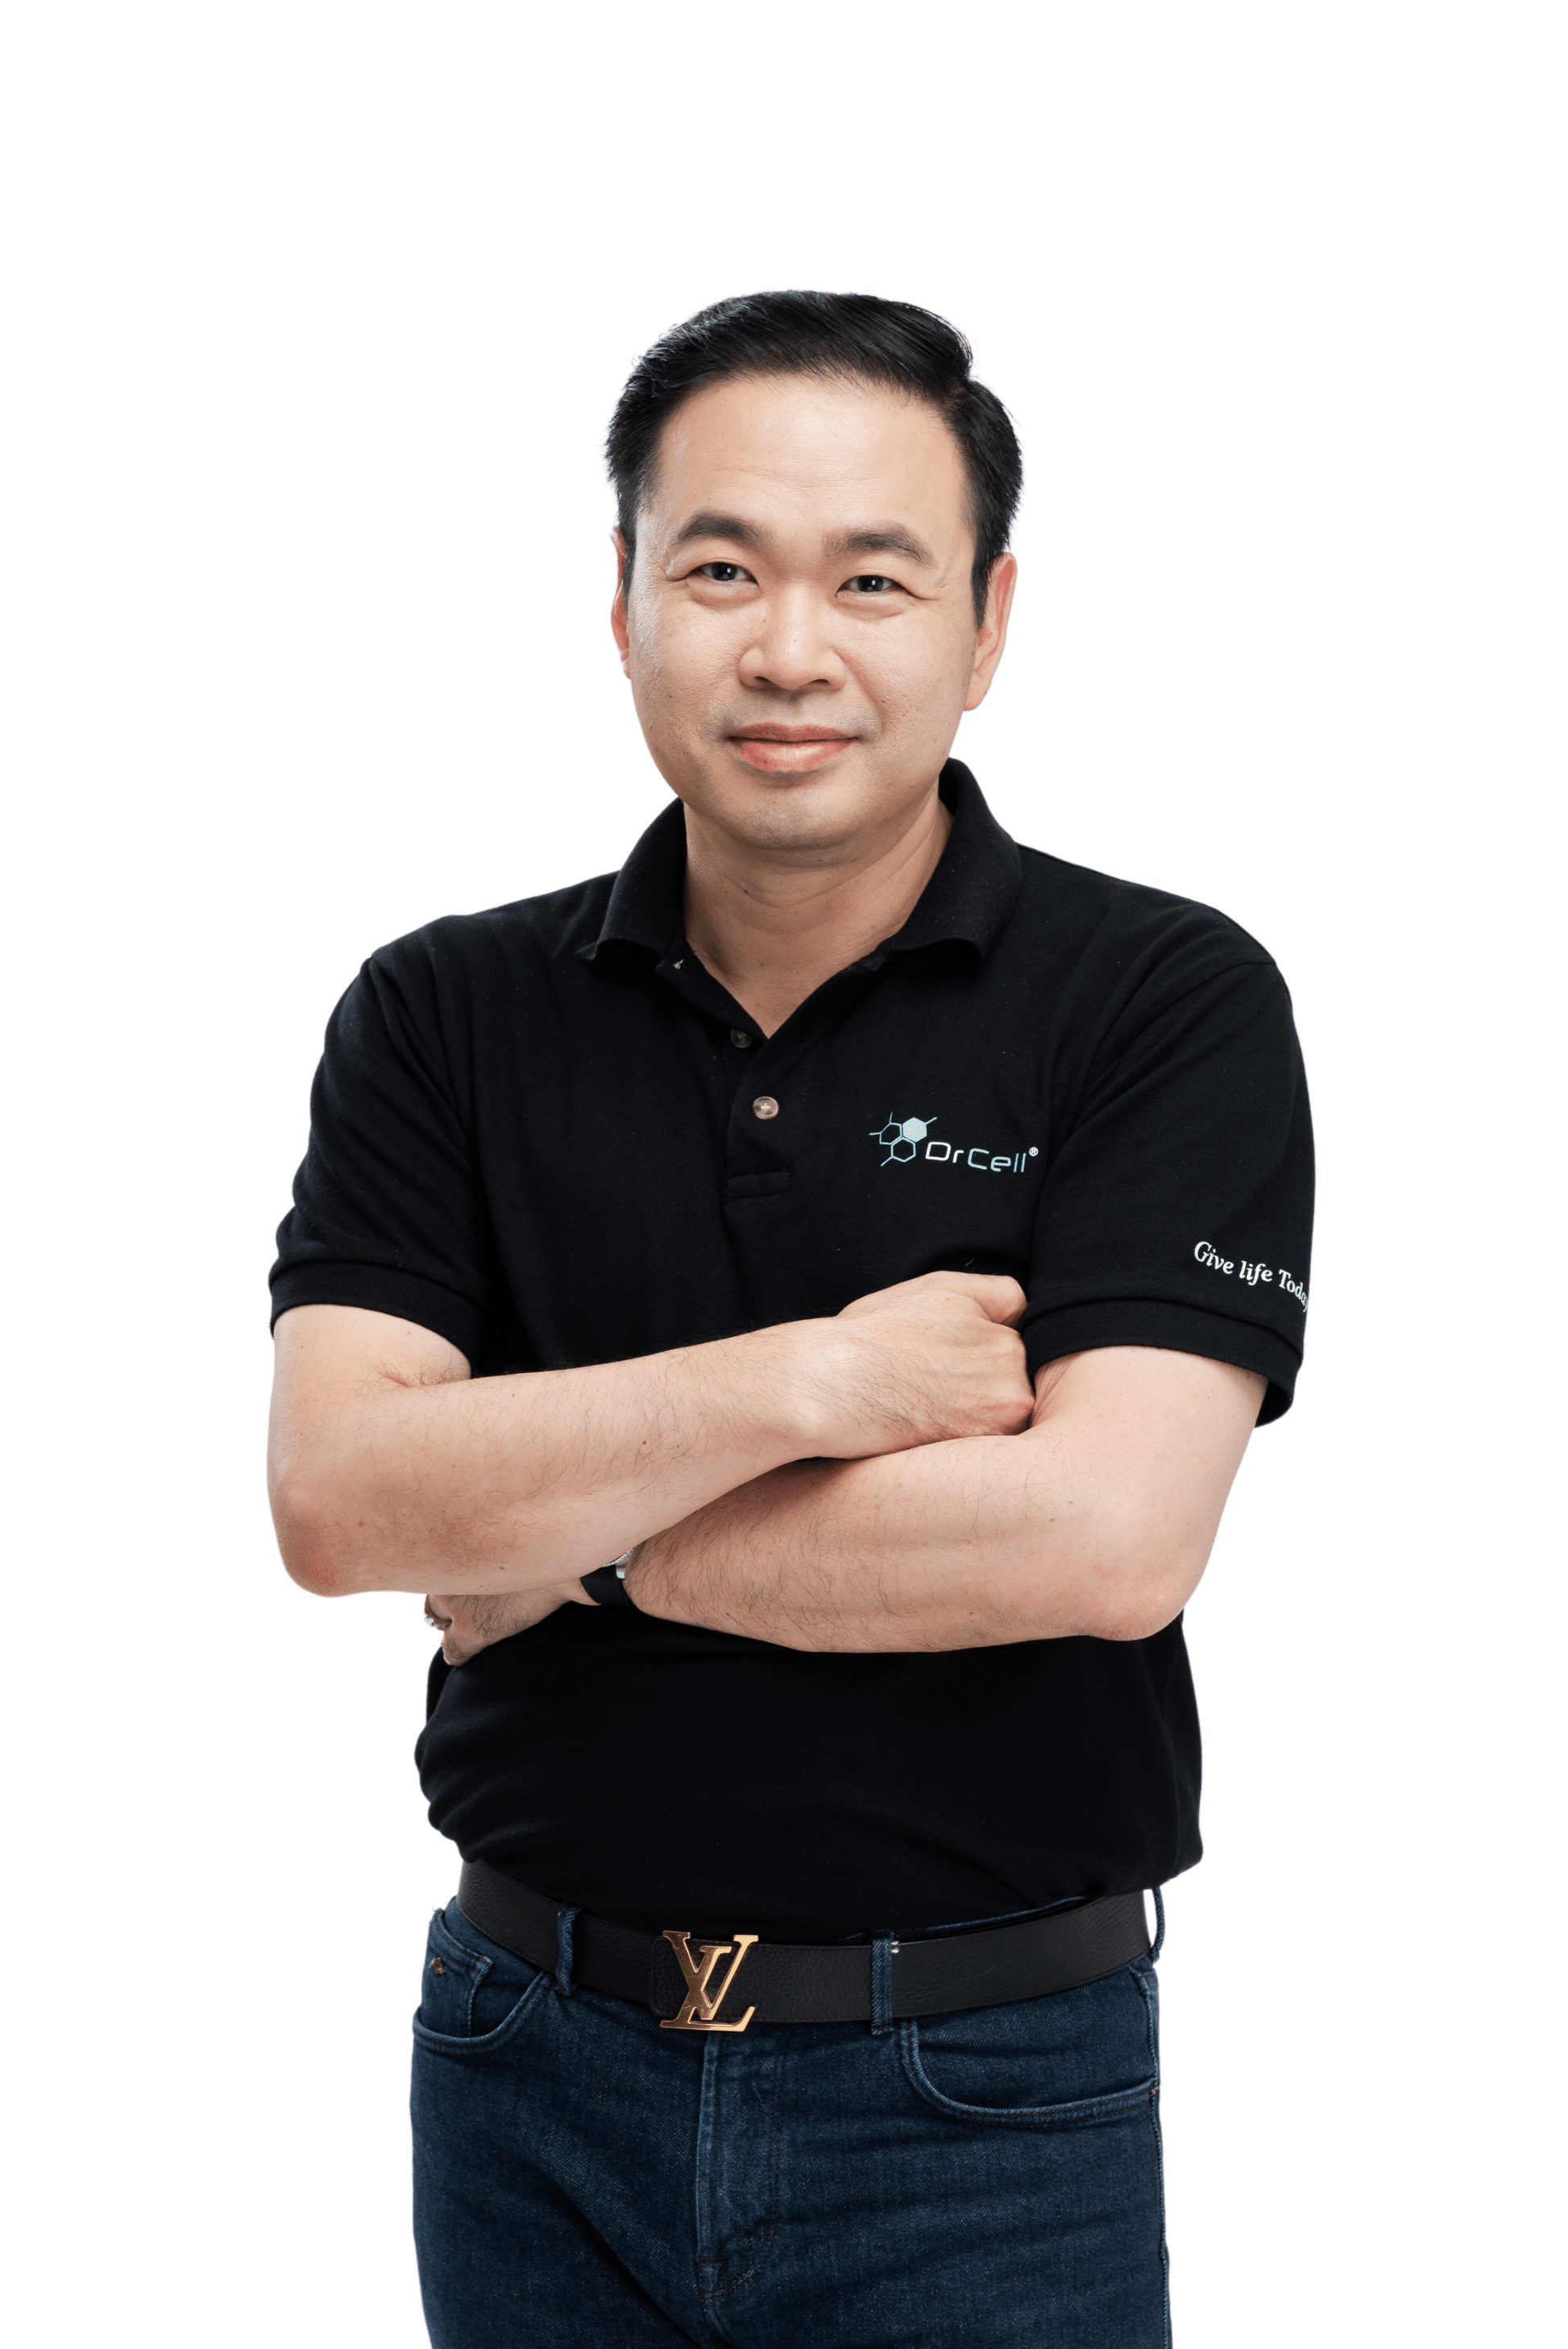 Dr. Michael Lim Ming Soon - Founder of Cell Genesis